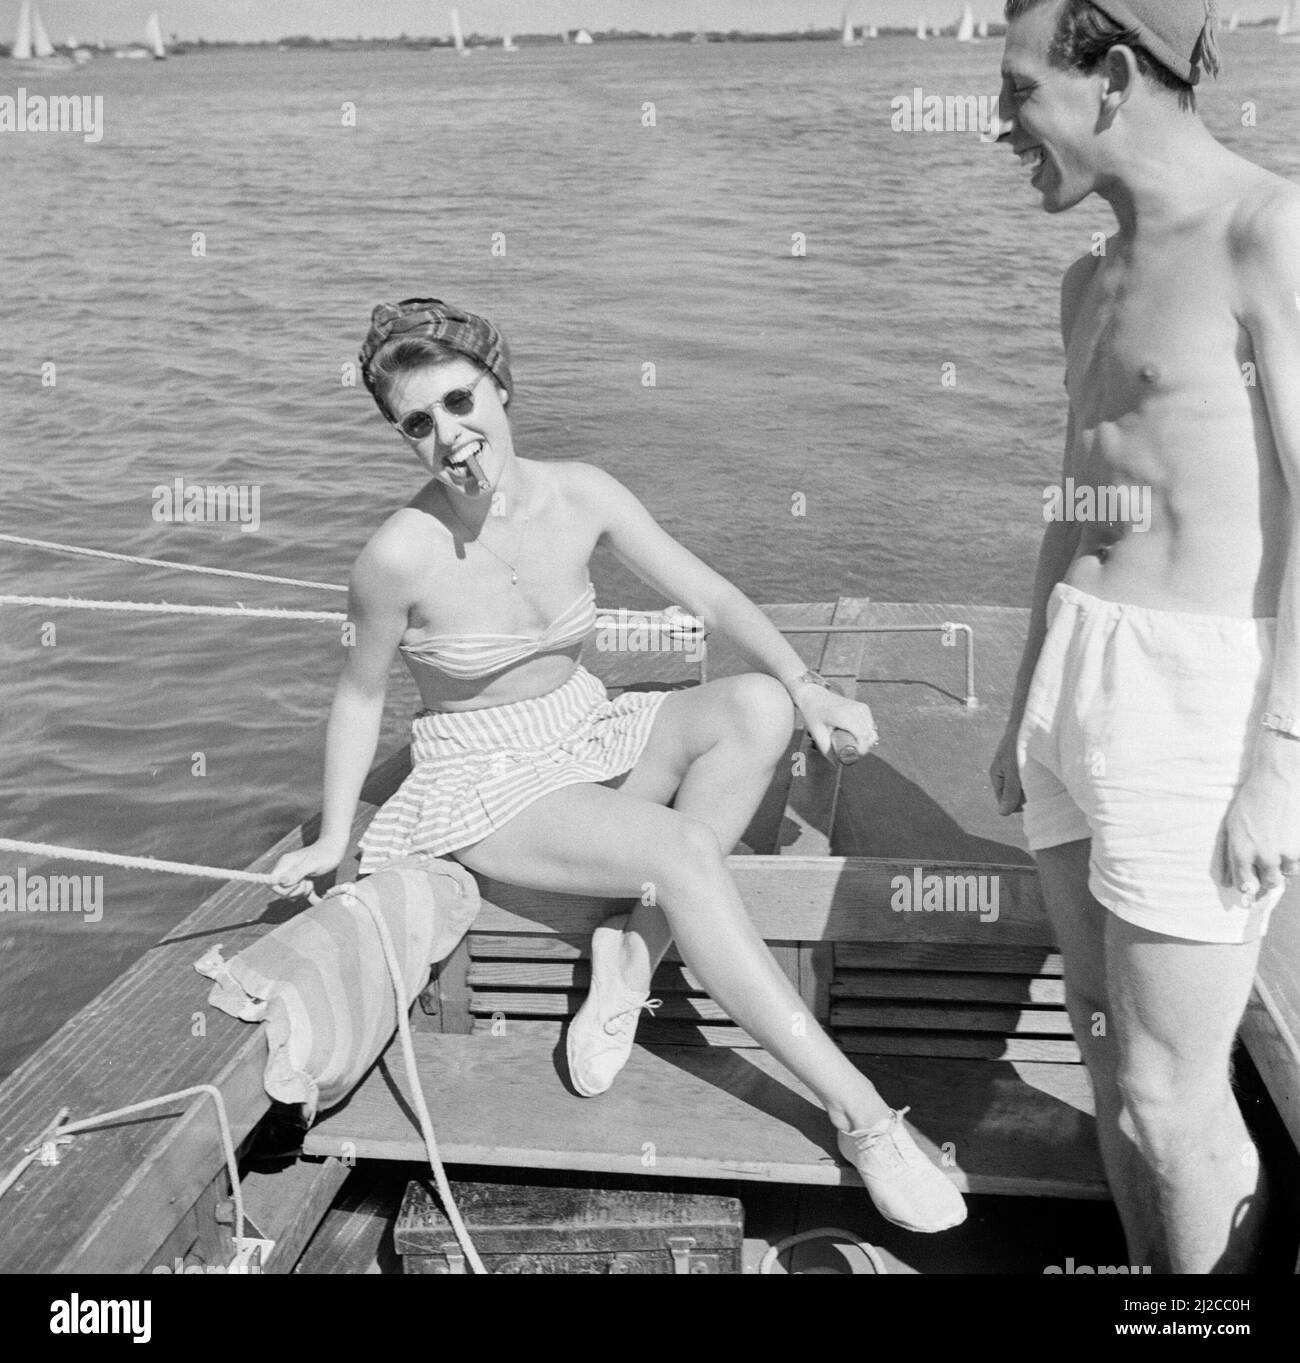 Woman in bikini with cigar in mouth, sitting at the helm next to a standing man  ca: 1946 Stock Photo